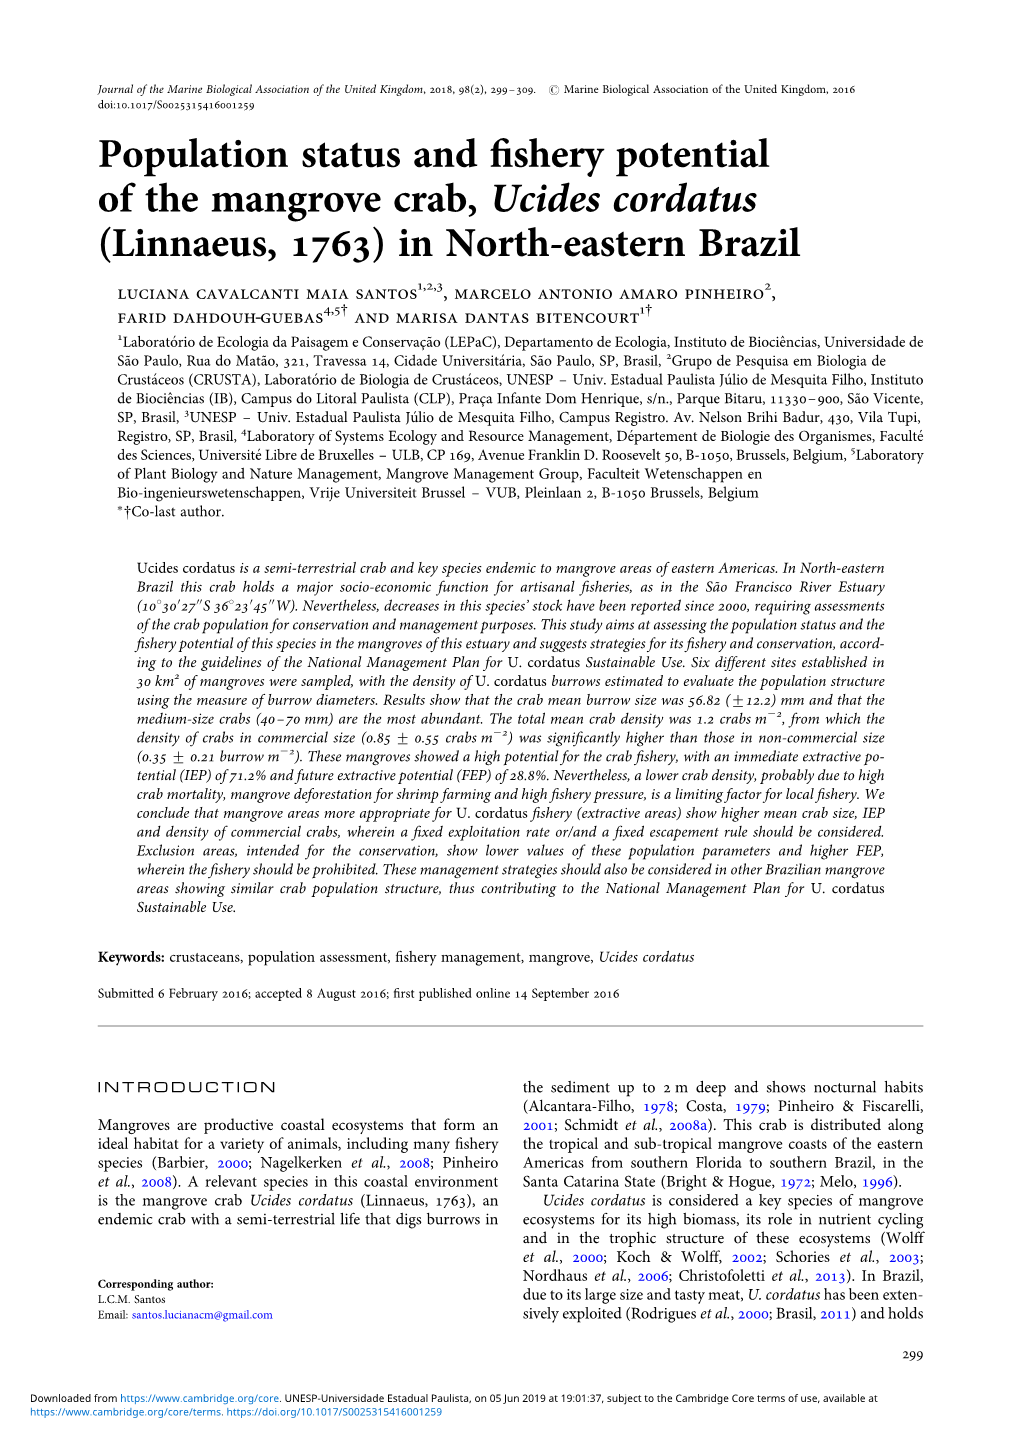 Population Status and Fishery Potential of the Mangrove Crab, Ucides Cordatus (Linnaeus, 1763) in North-Eastern Brazil